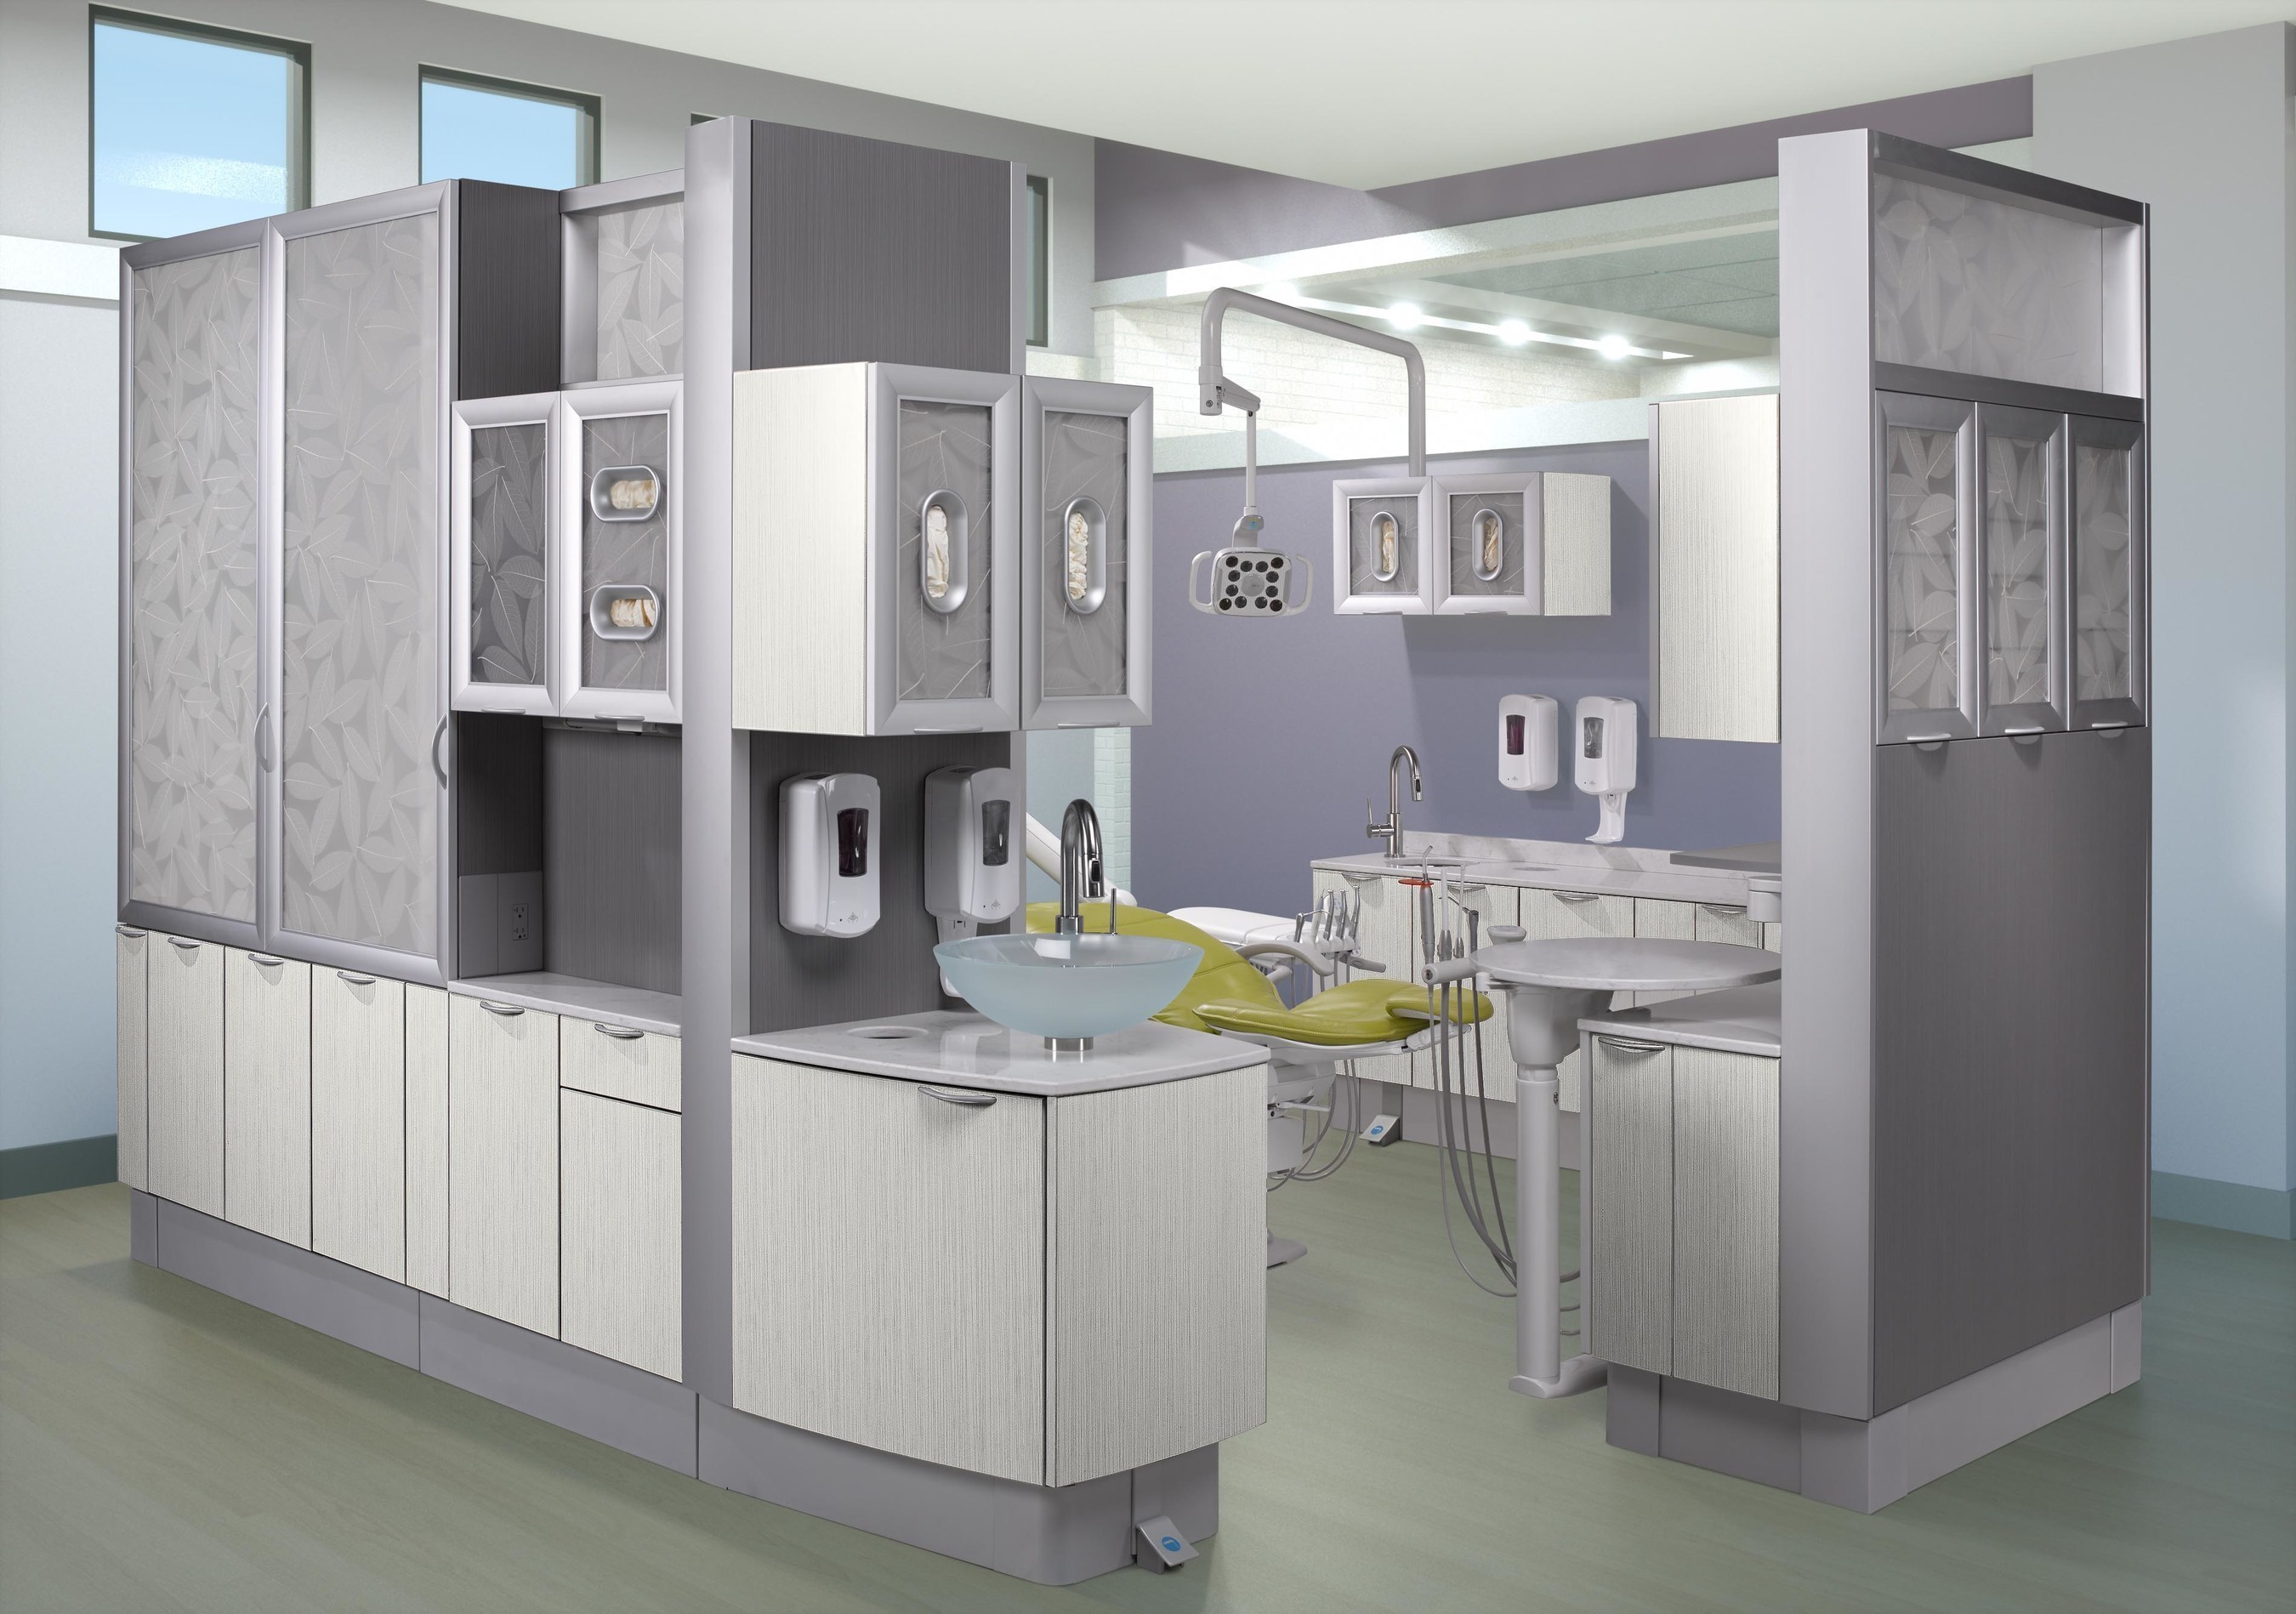 Introducing A Dec Inspire Dental Furniture Cabinetry Designed To